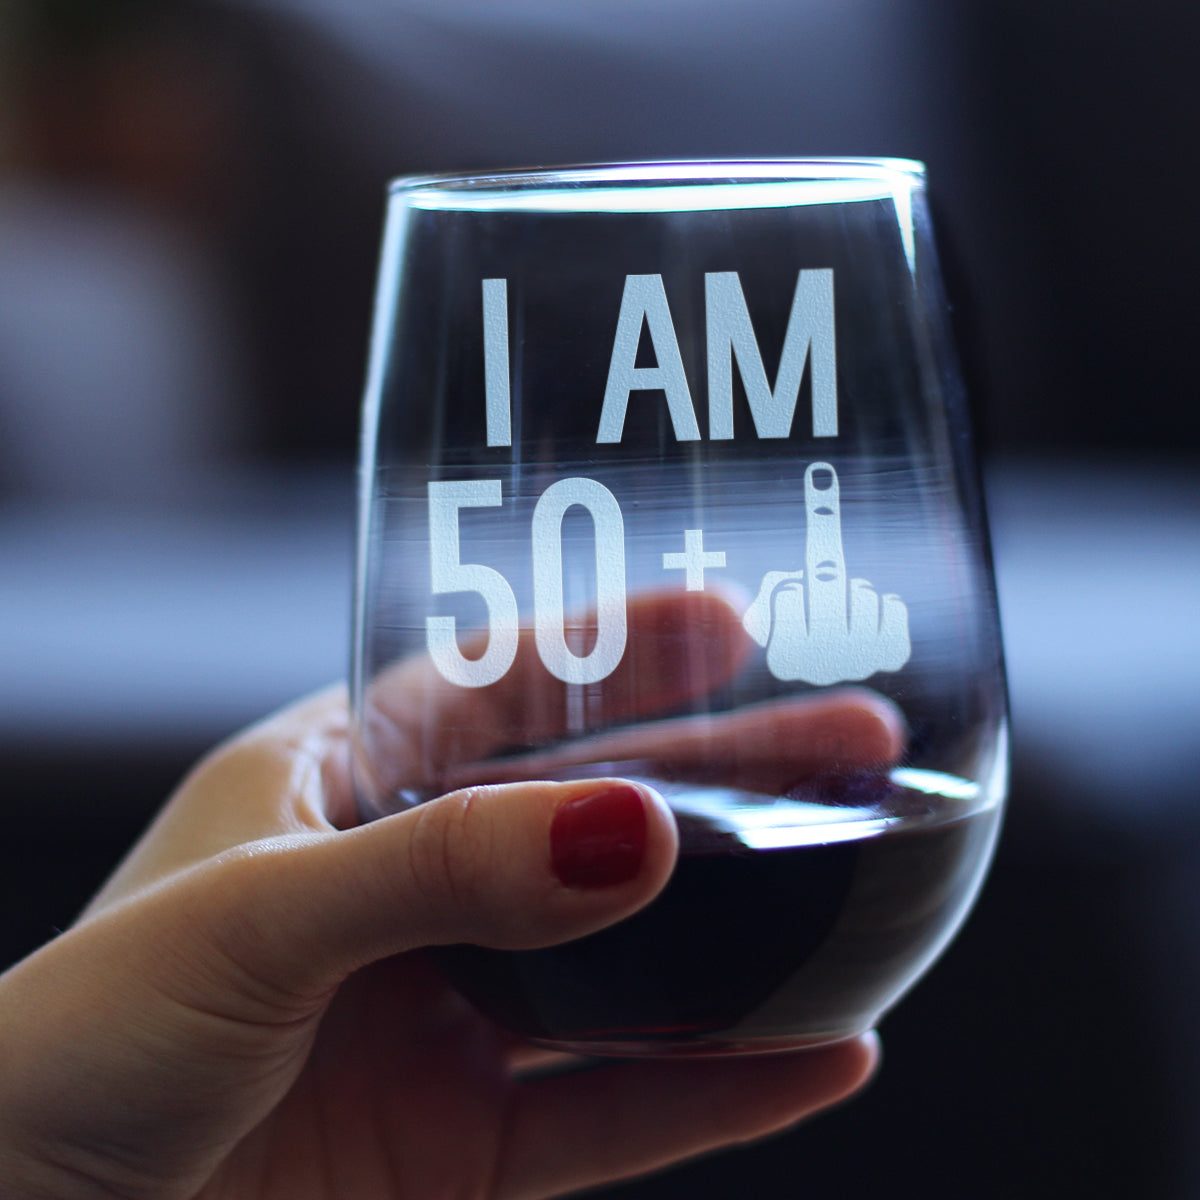 50 + 1 Middle Finger - 51st Birthday Stemless Wine Glass for Women &amp; Men - Cute Funny Wine Gift Idea - Unique Personalized Bday Glasses for Best Friend Turning 51 - Drinking Party Decoration